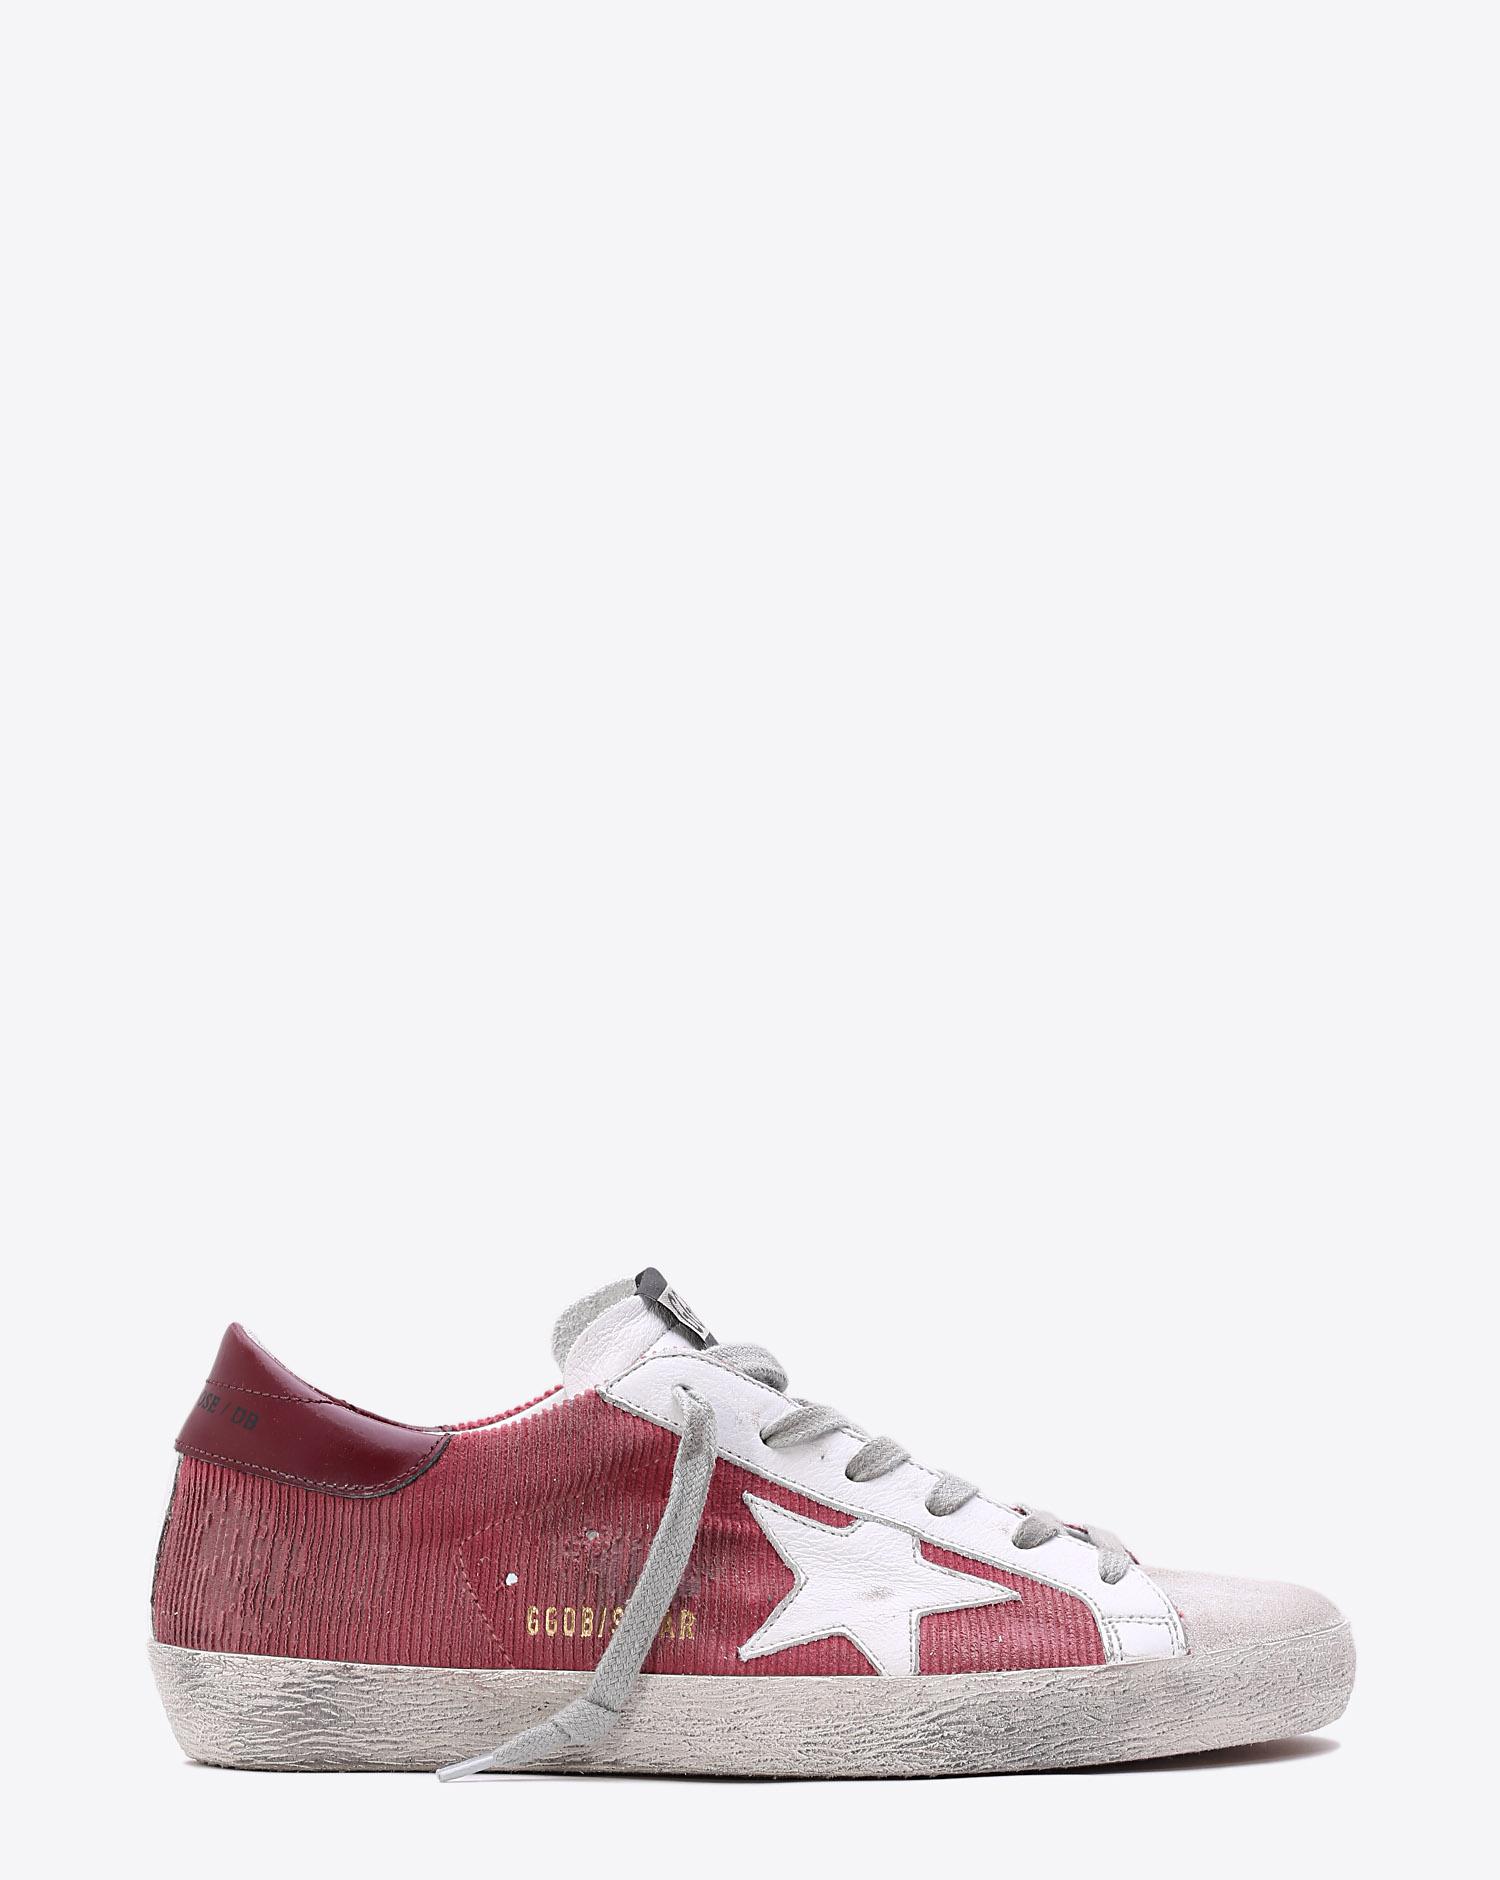 Golden Goose Woman Collection Sneakers Superstar Brick Corduroy  White Star   